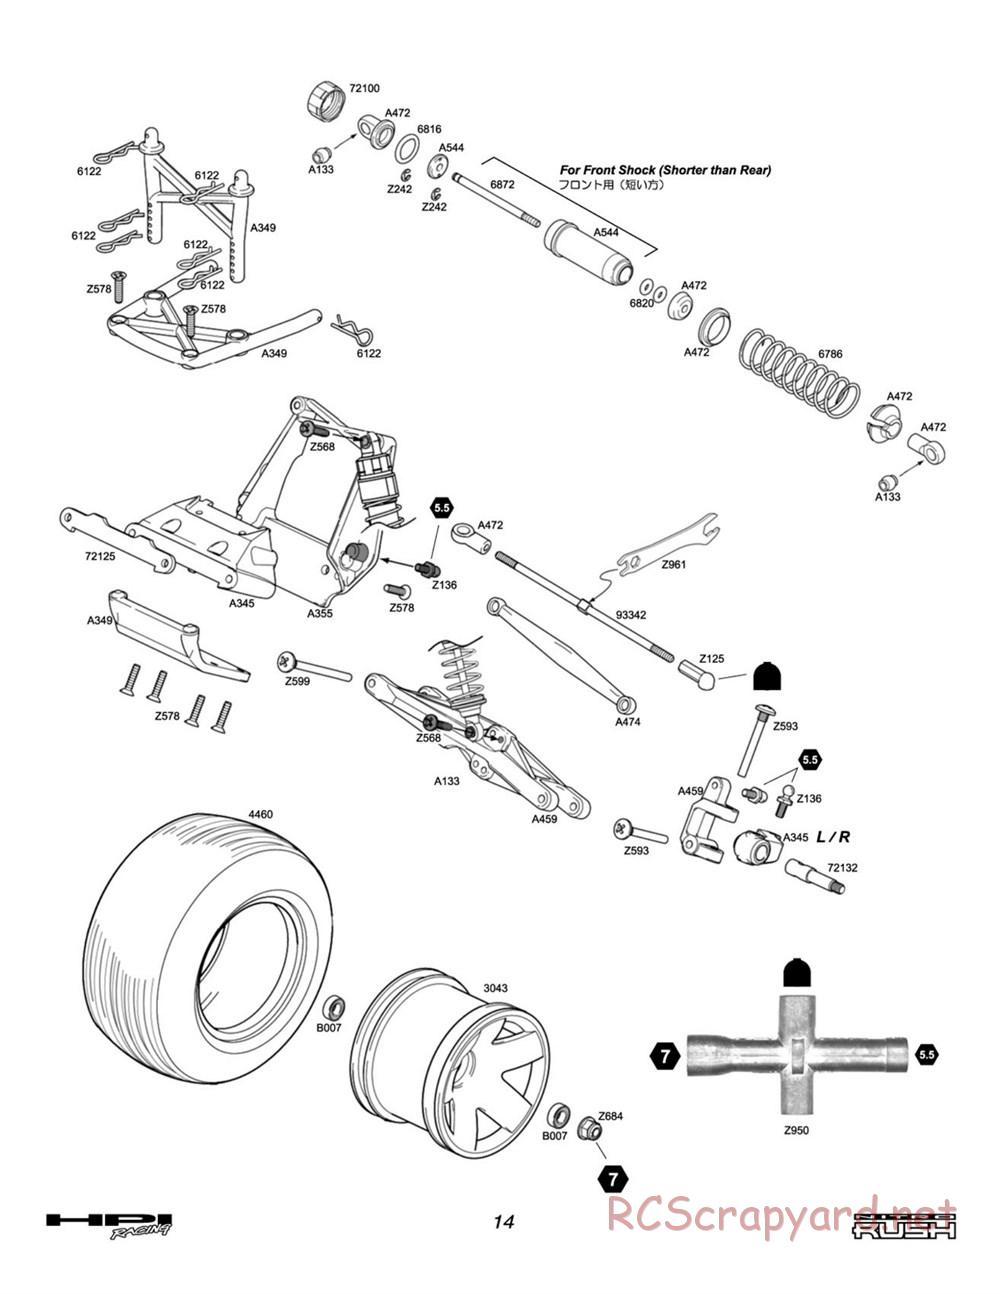 HPI - Nitro Rush - Exploded View - Page 13